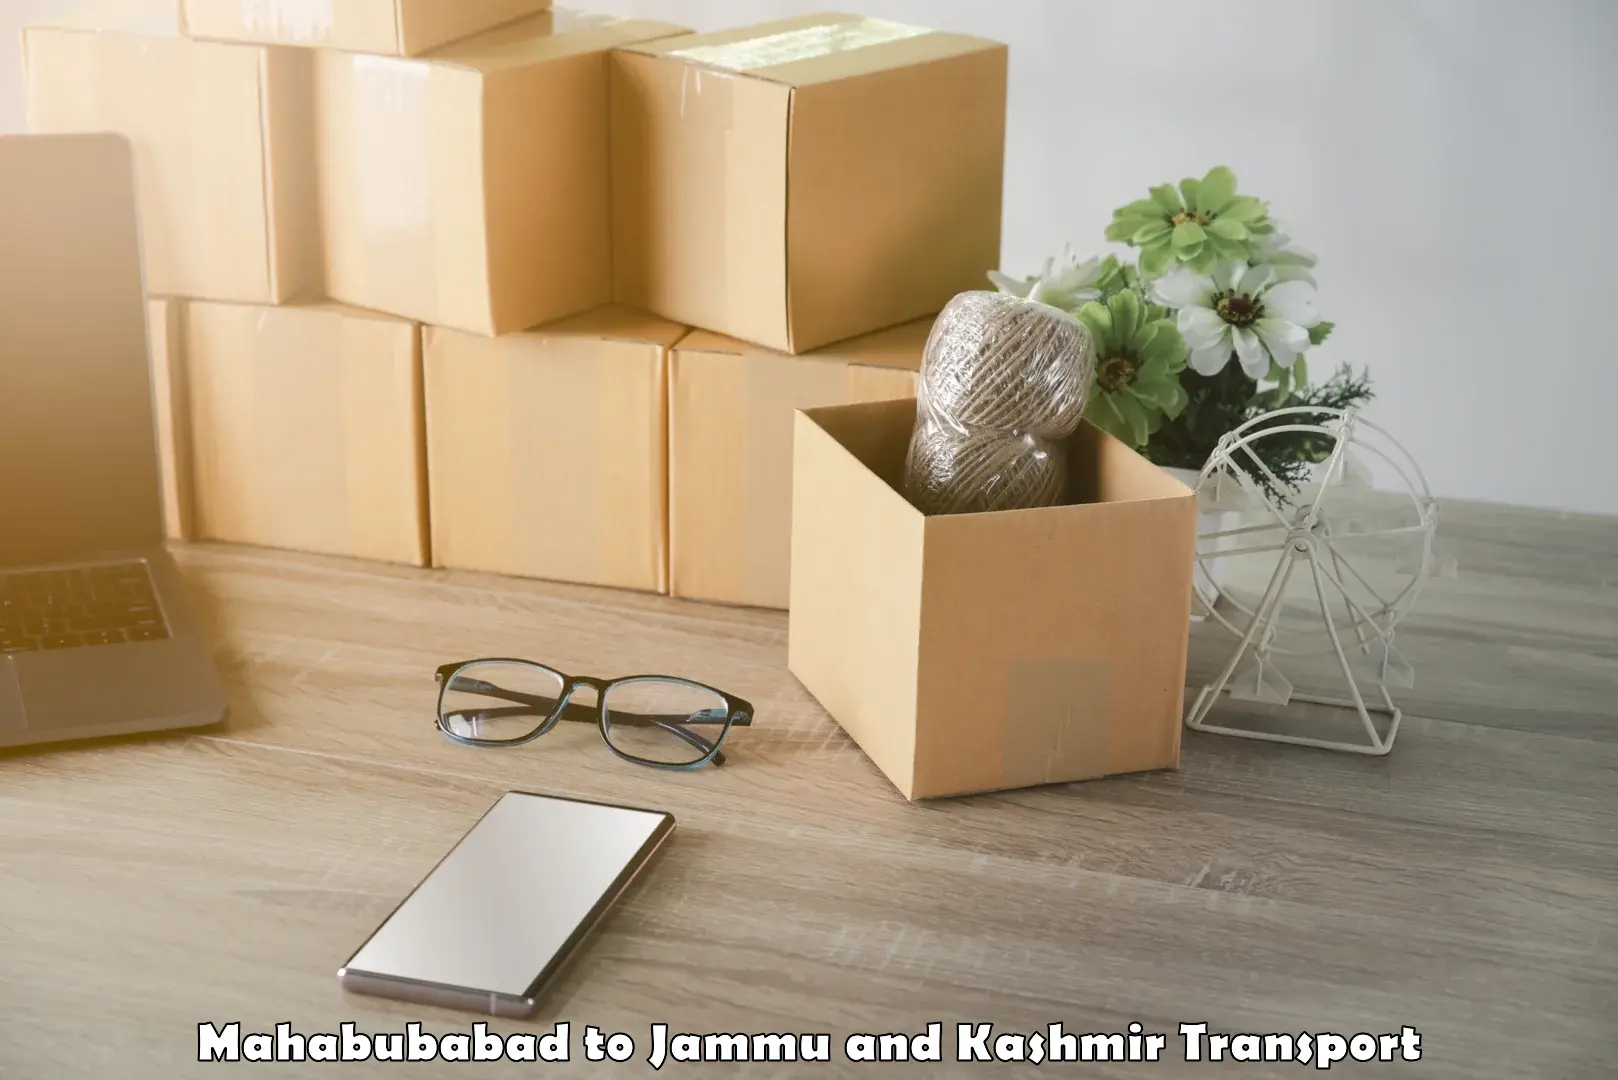 Transport services in Mahabubabad to Jammu and Kashmir